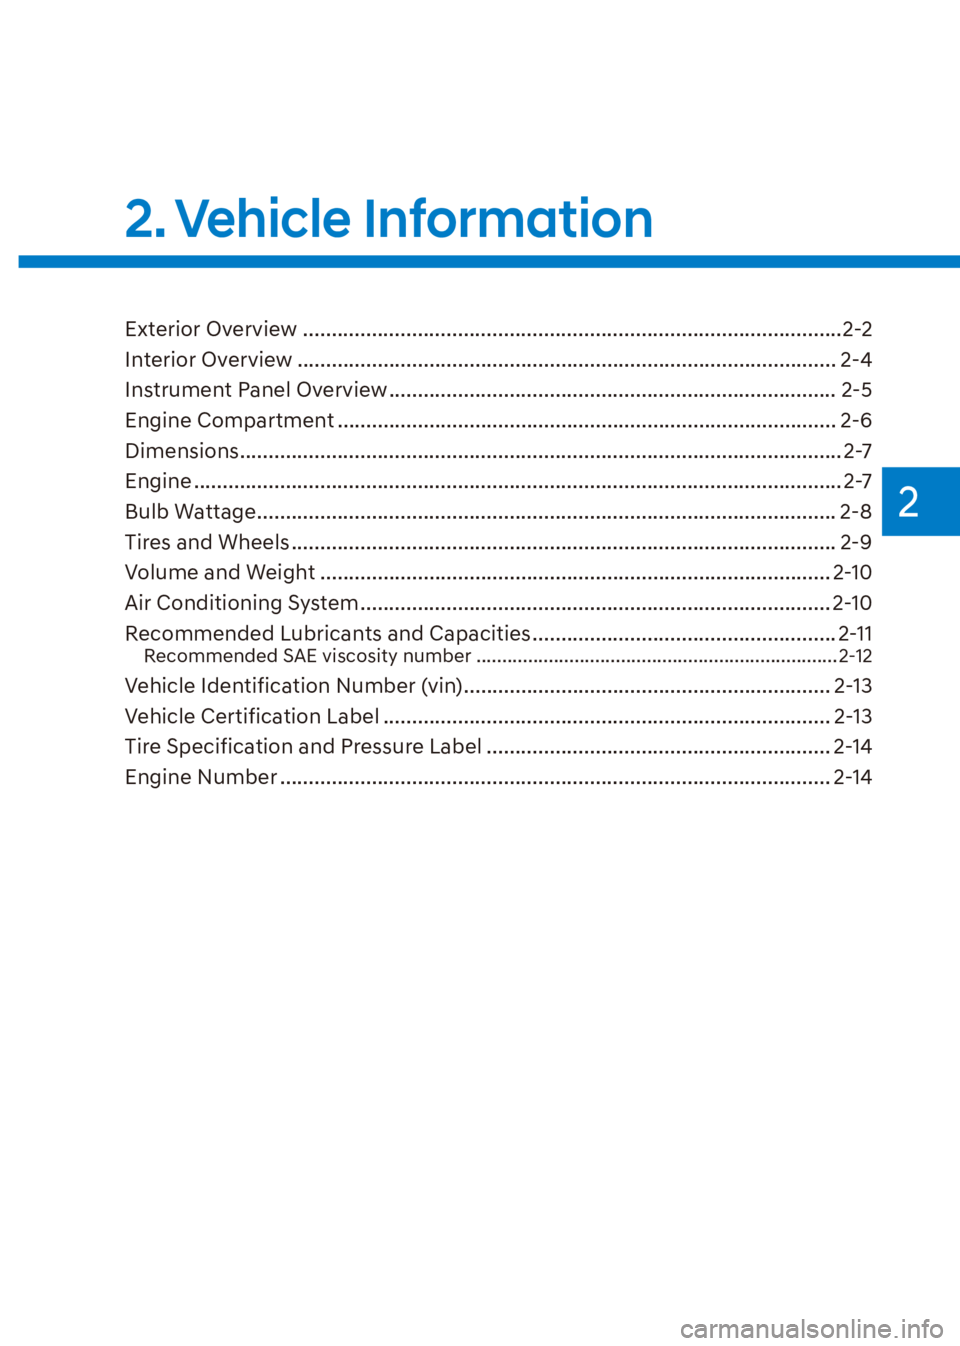 HYUNDAI VENUE 2021 User Guide 2
2. Vehicle  Information
Exterior Overview ..............................................................................................2-2
Interior Overview ........................................